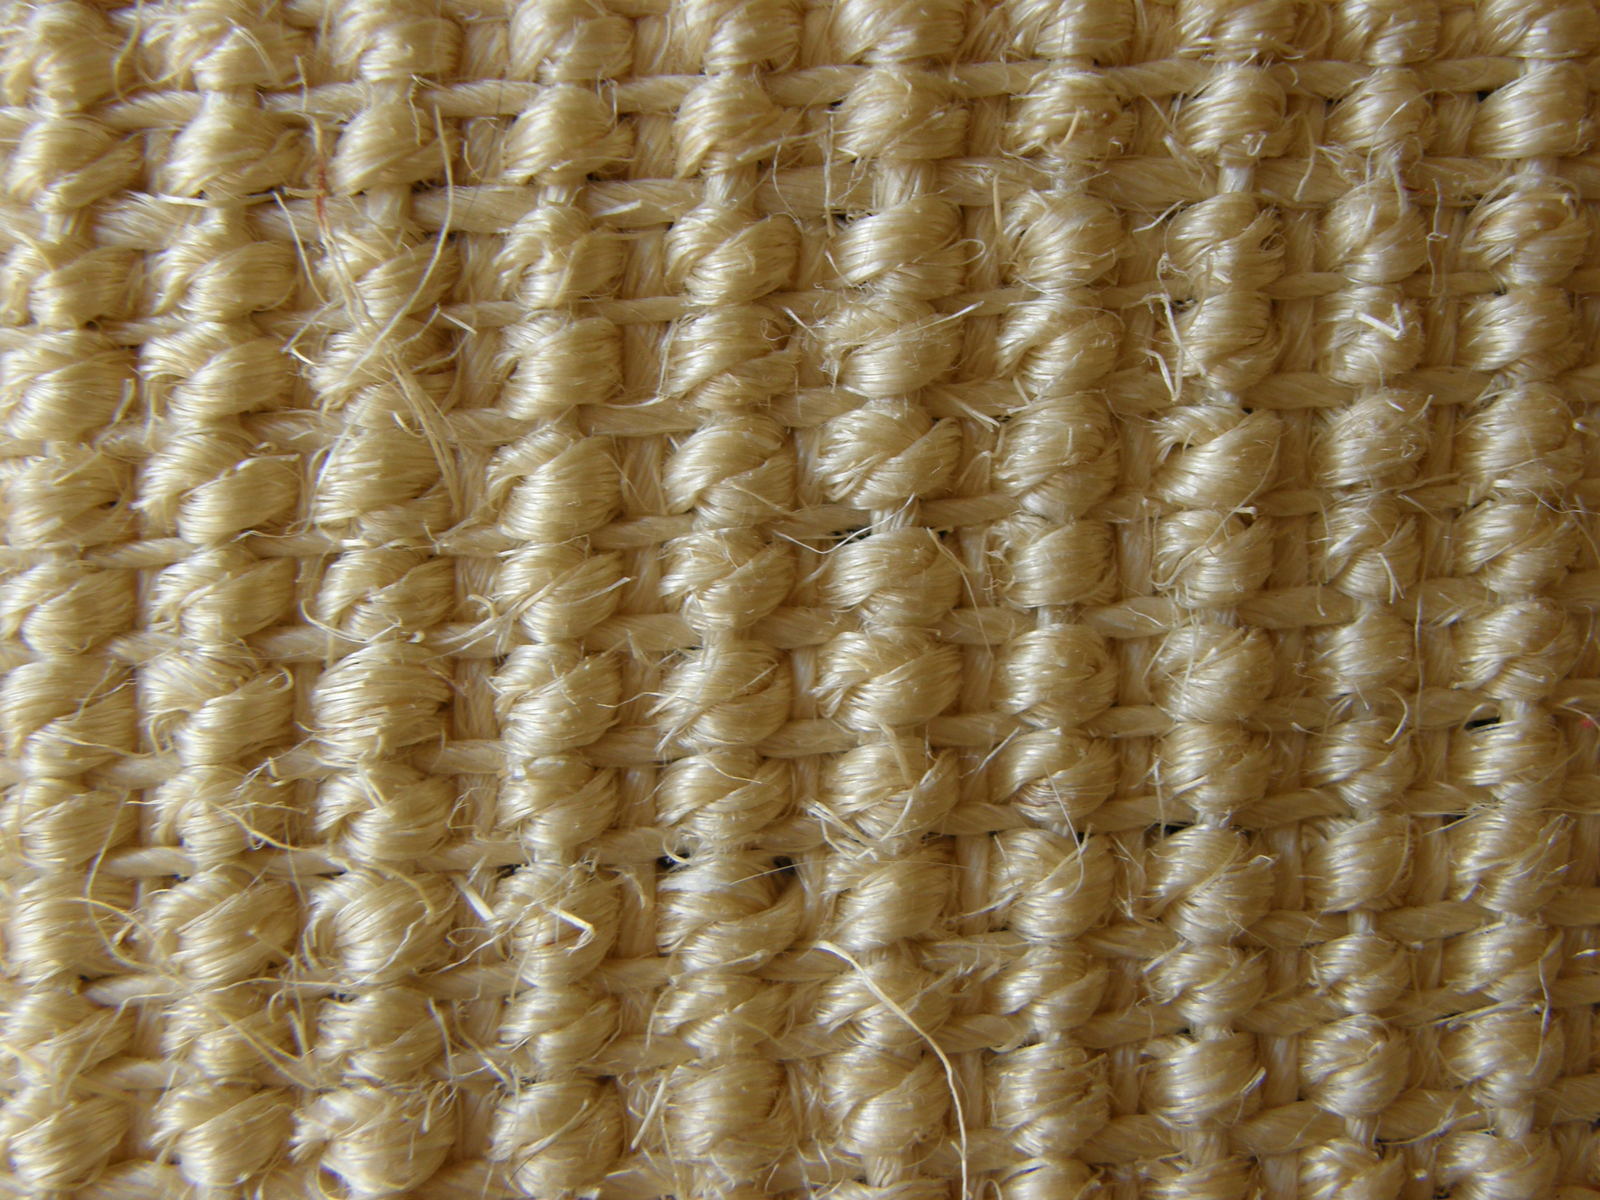 some white yarn that is all over the surface